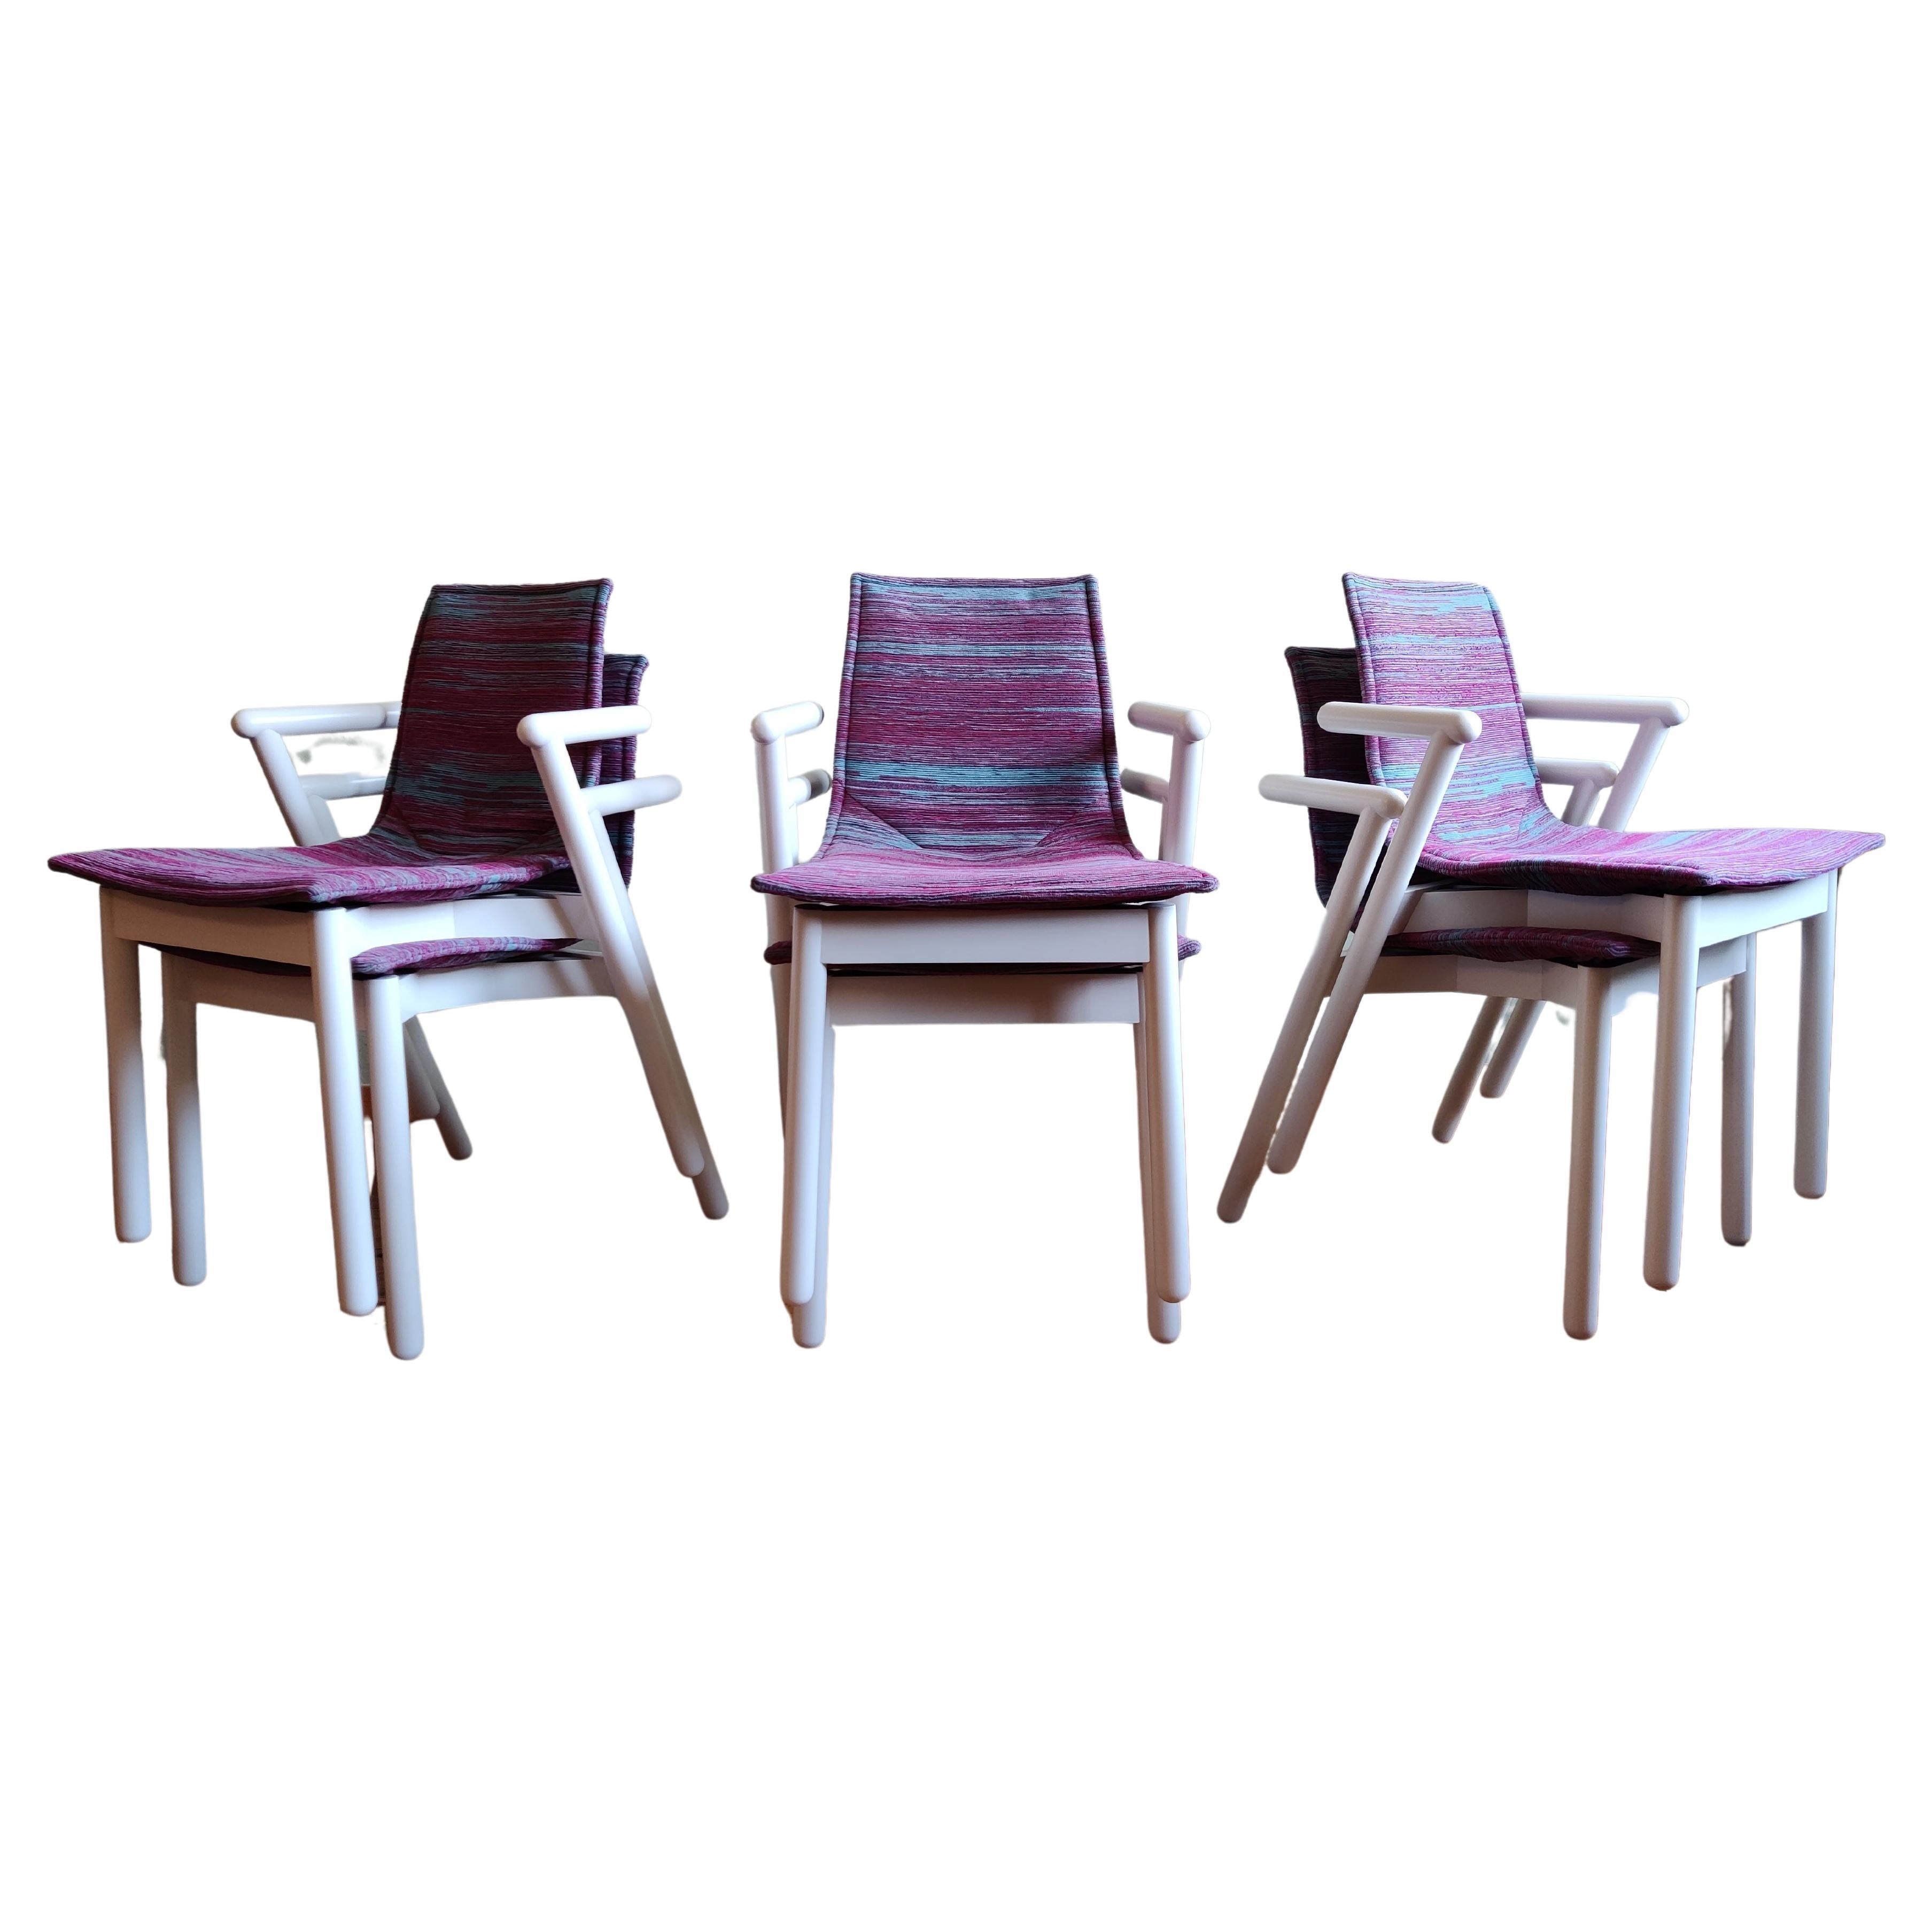 Italian dining room chairs "Villabianca" by Vico Magistretti for Cassina